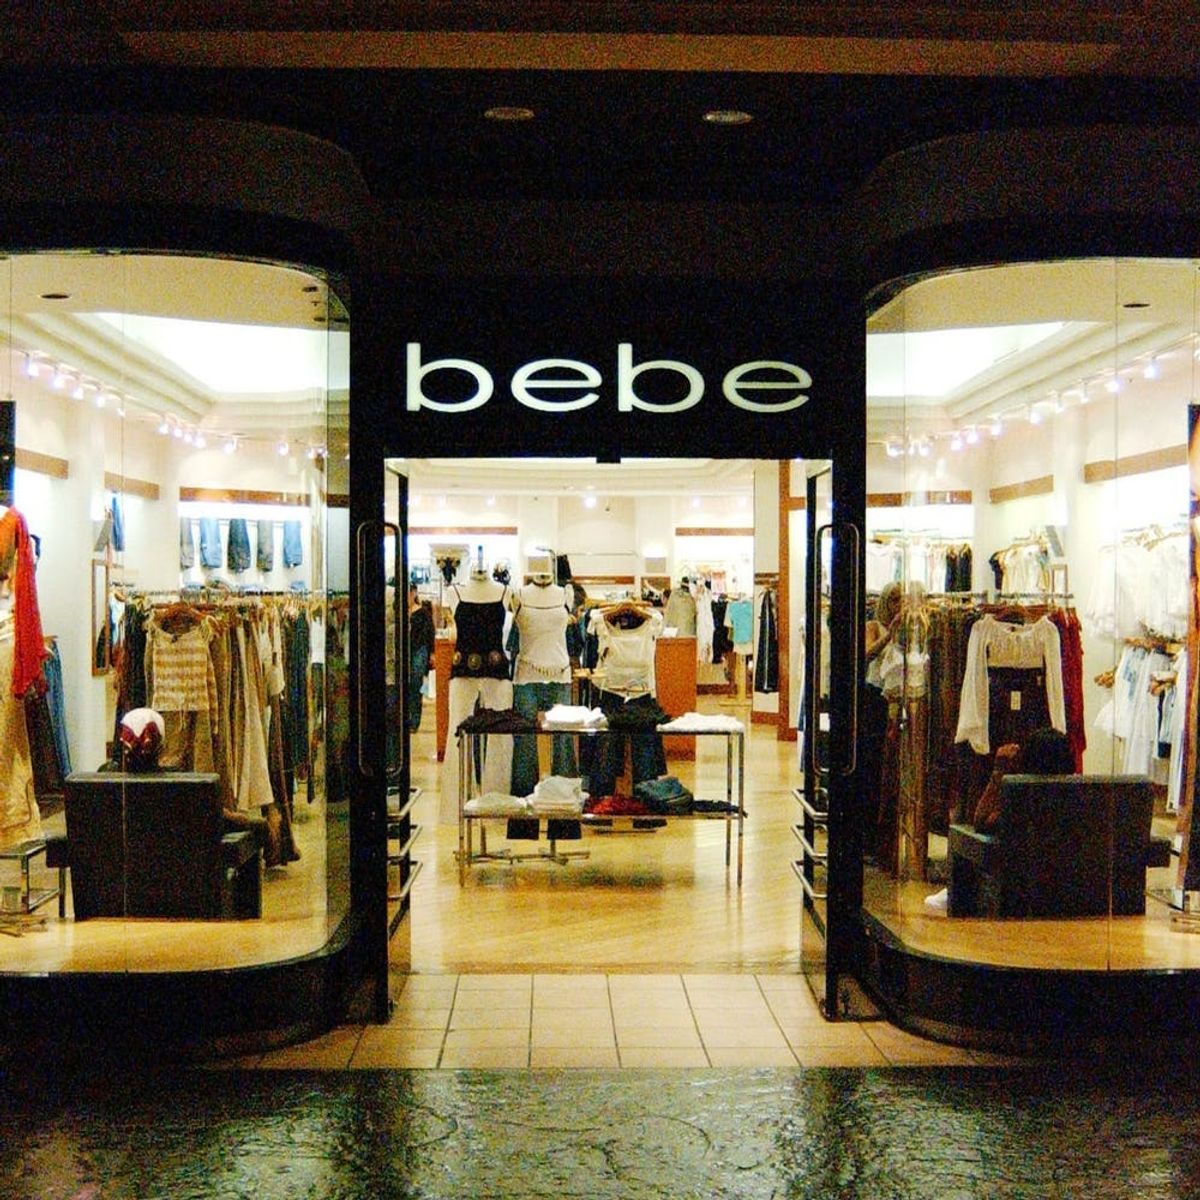 Bebe May Soon Join a Growing List of Fallen Mall Heroes